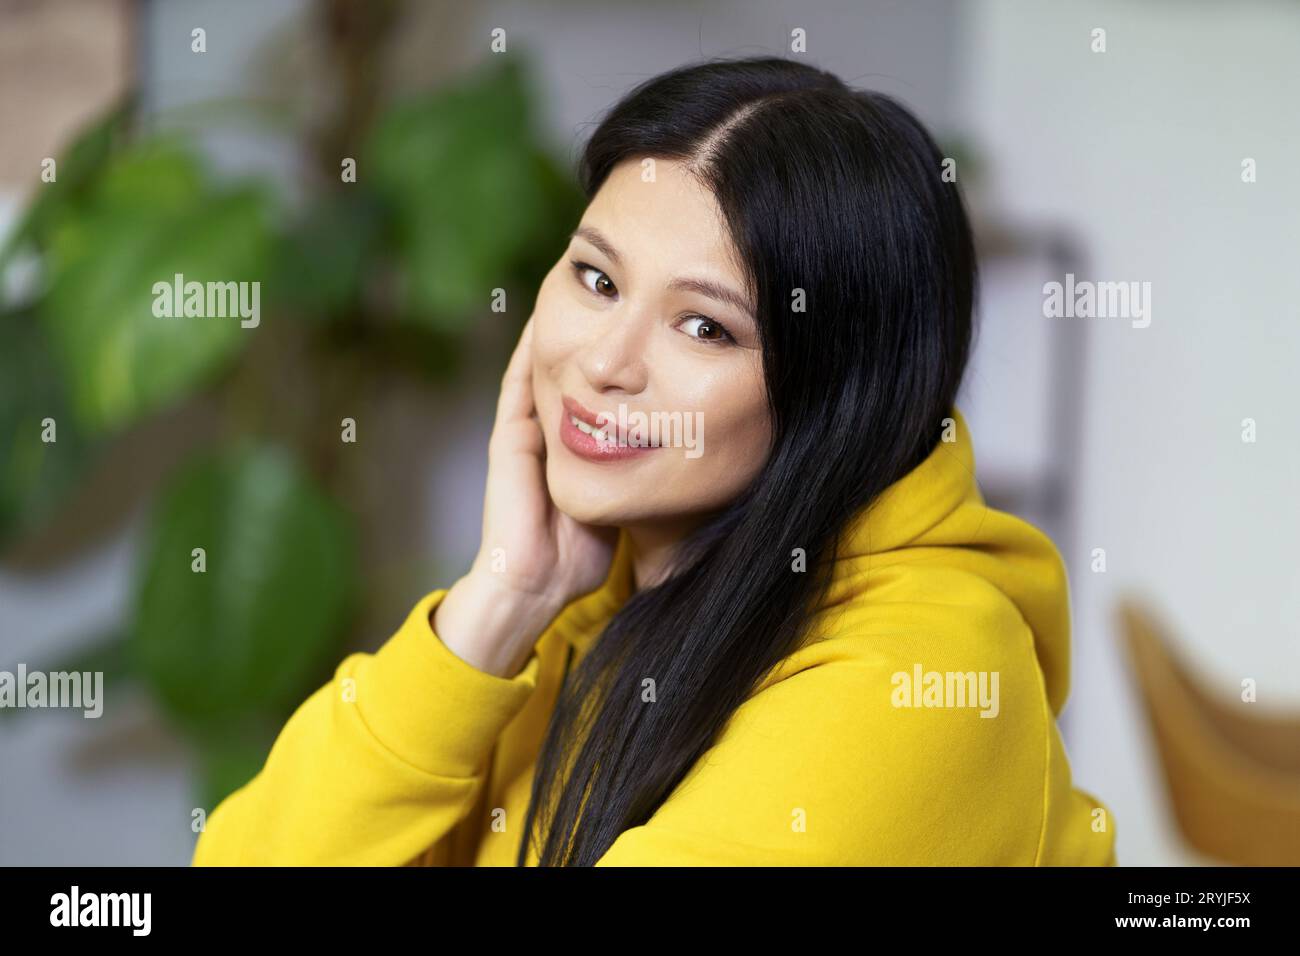 Pretty middle-aged Asian woman with healthy, glowing facial skin and well-groomed hair, promoting concept of healthy lifestyle. Stock Photo